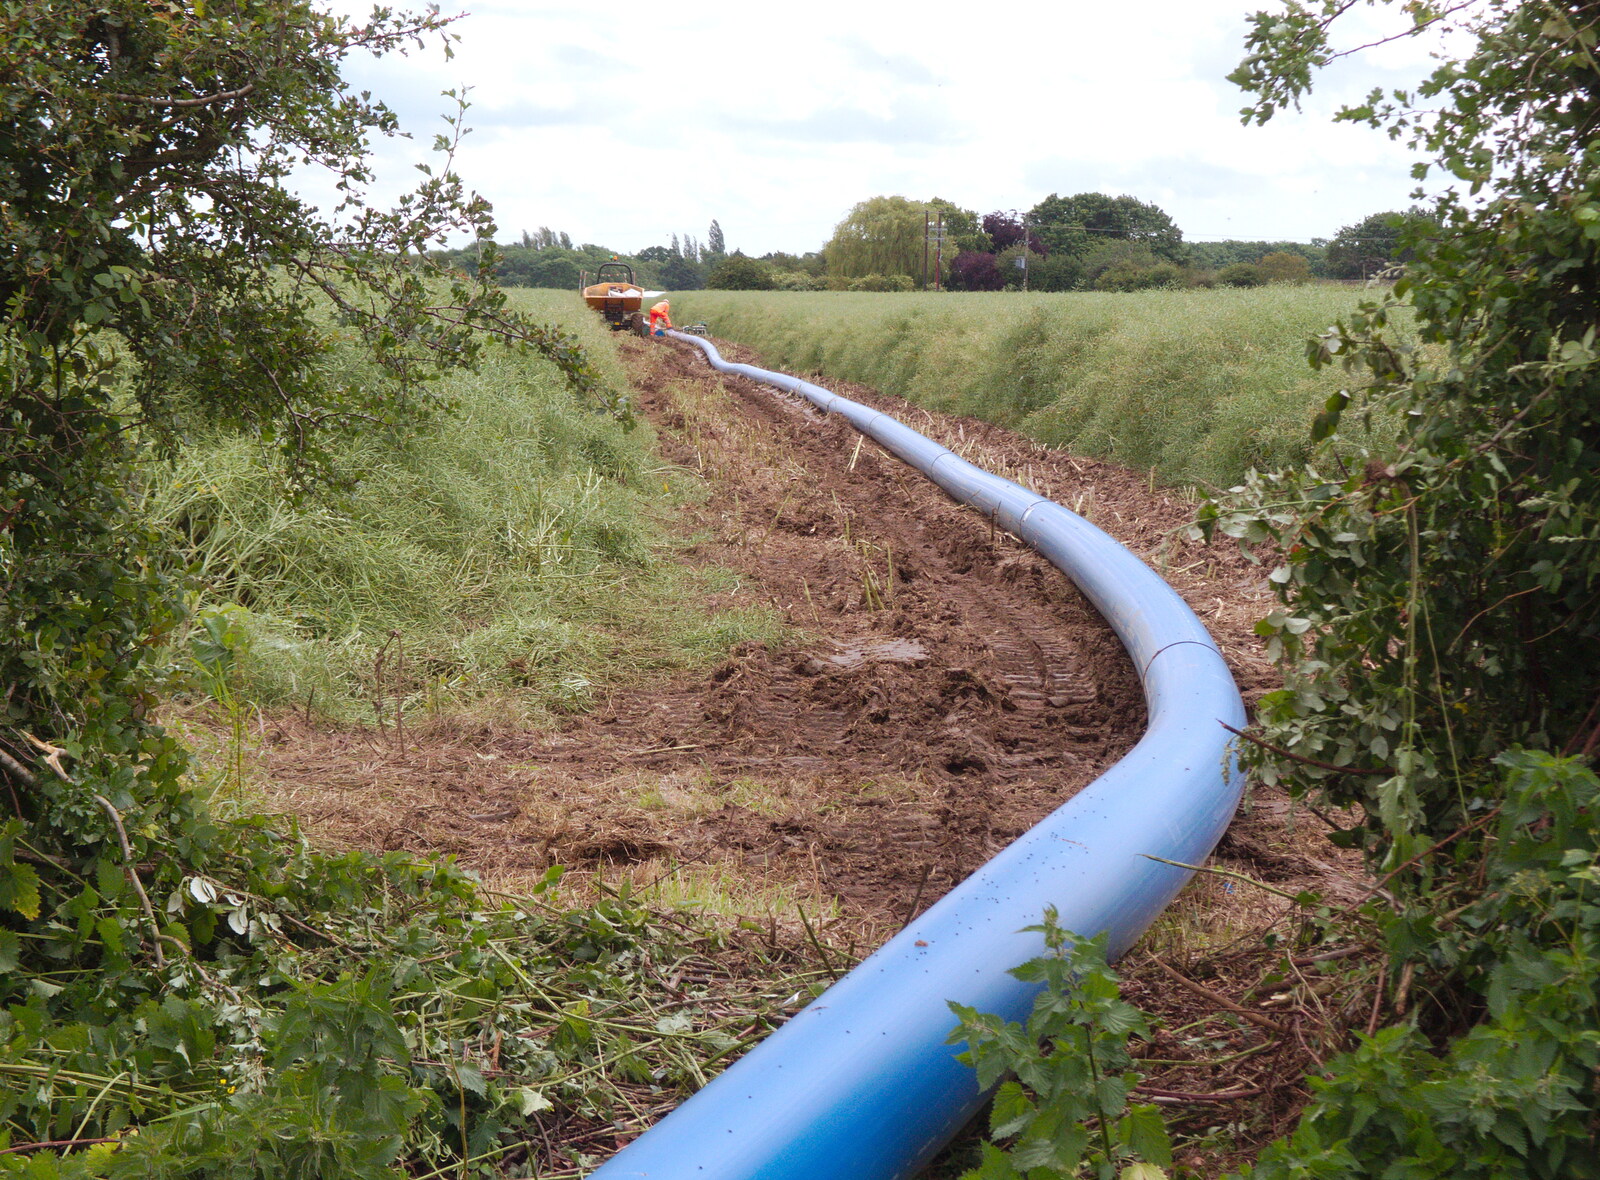 The pipe snakes over the field towards Eye from A High-Pressure Watermain and some Graffiti, Eye and London - 11th June 2019